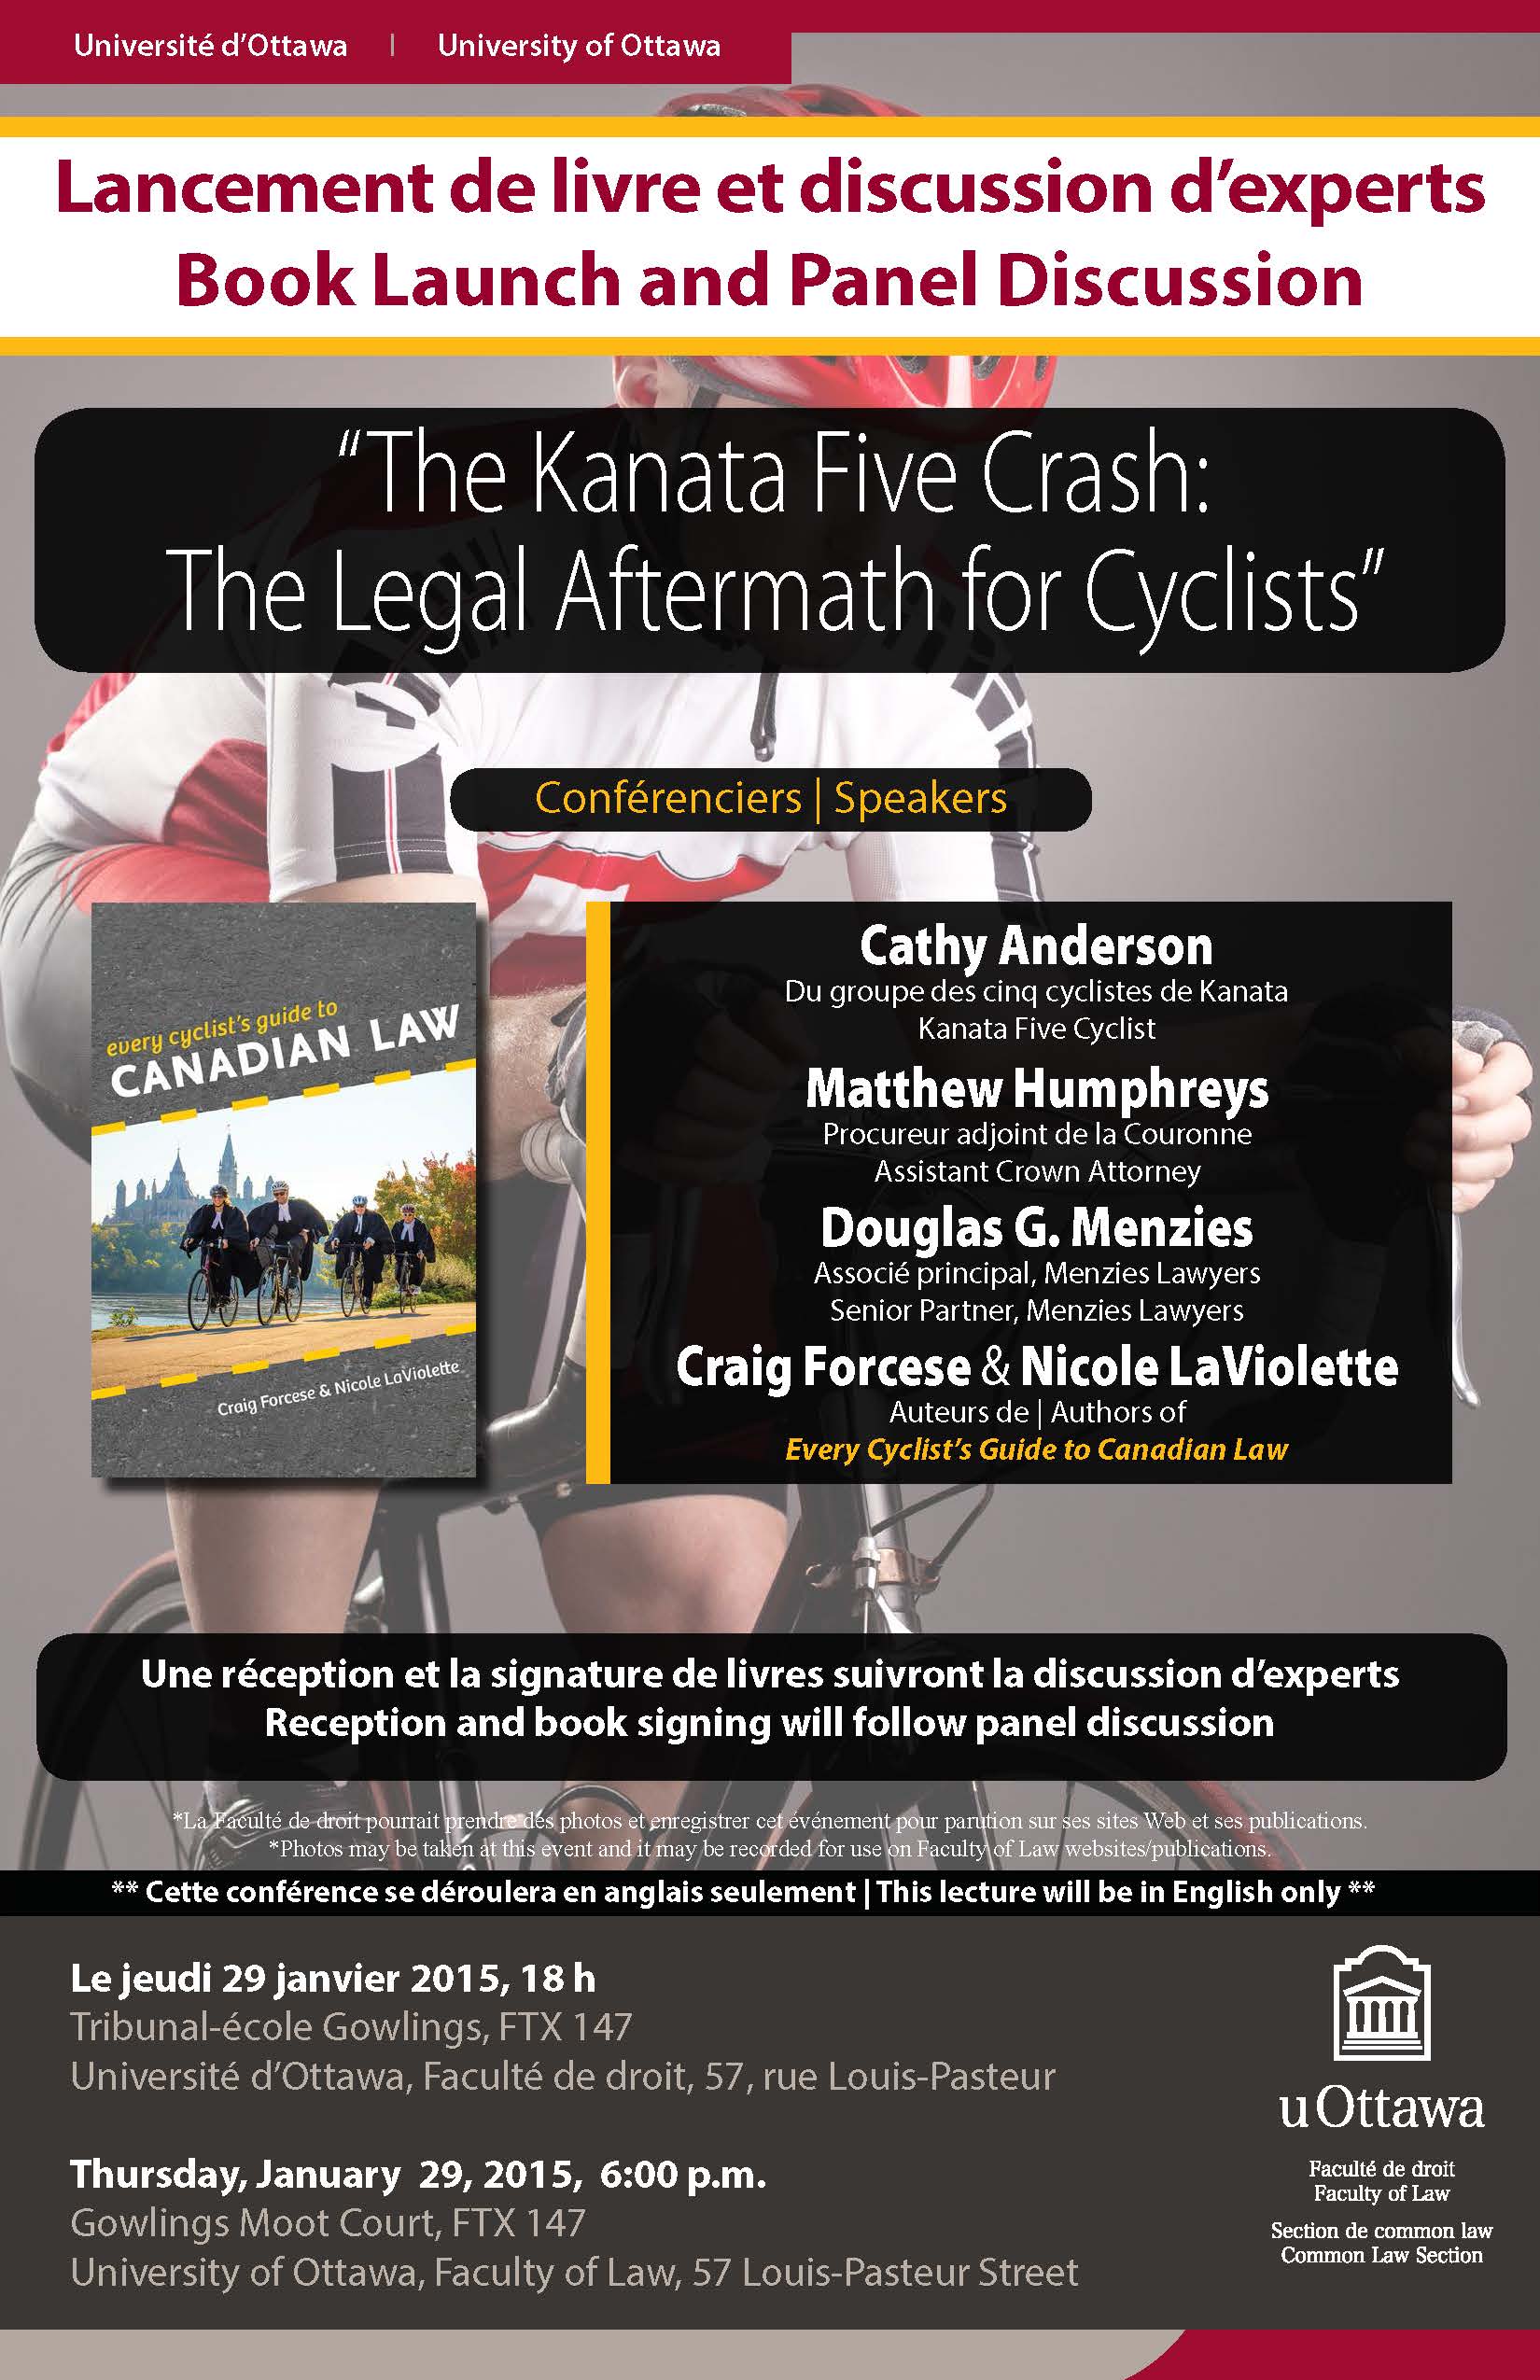 Poster with a cyclist in the background and information about the Every Cyclist's Guide to Canadian Law book launch in the foreground.